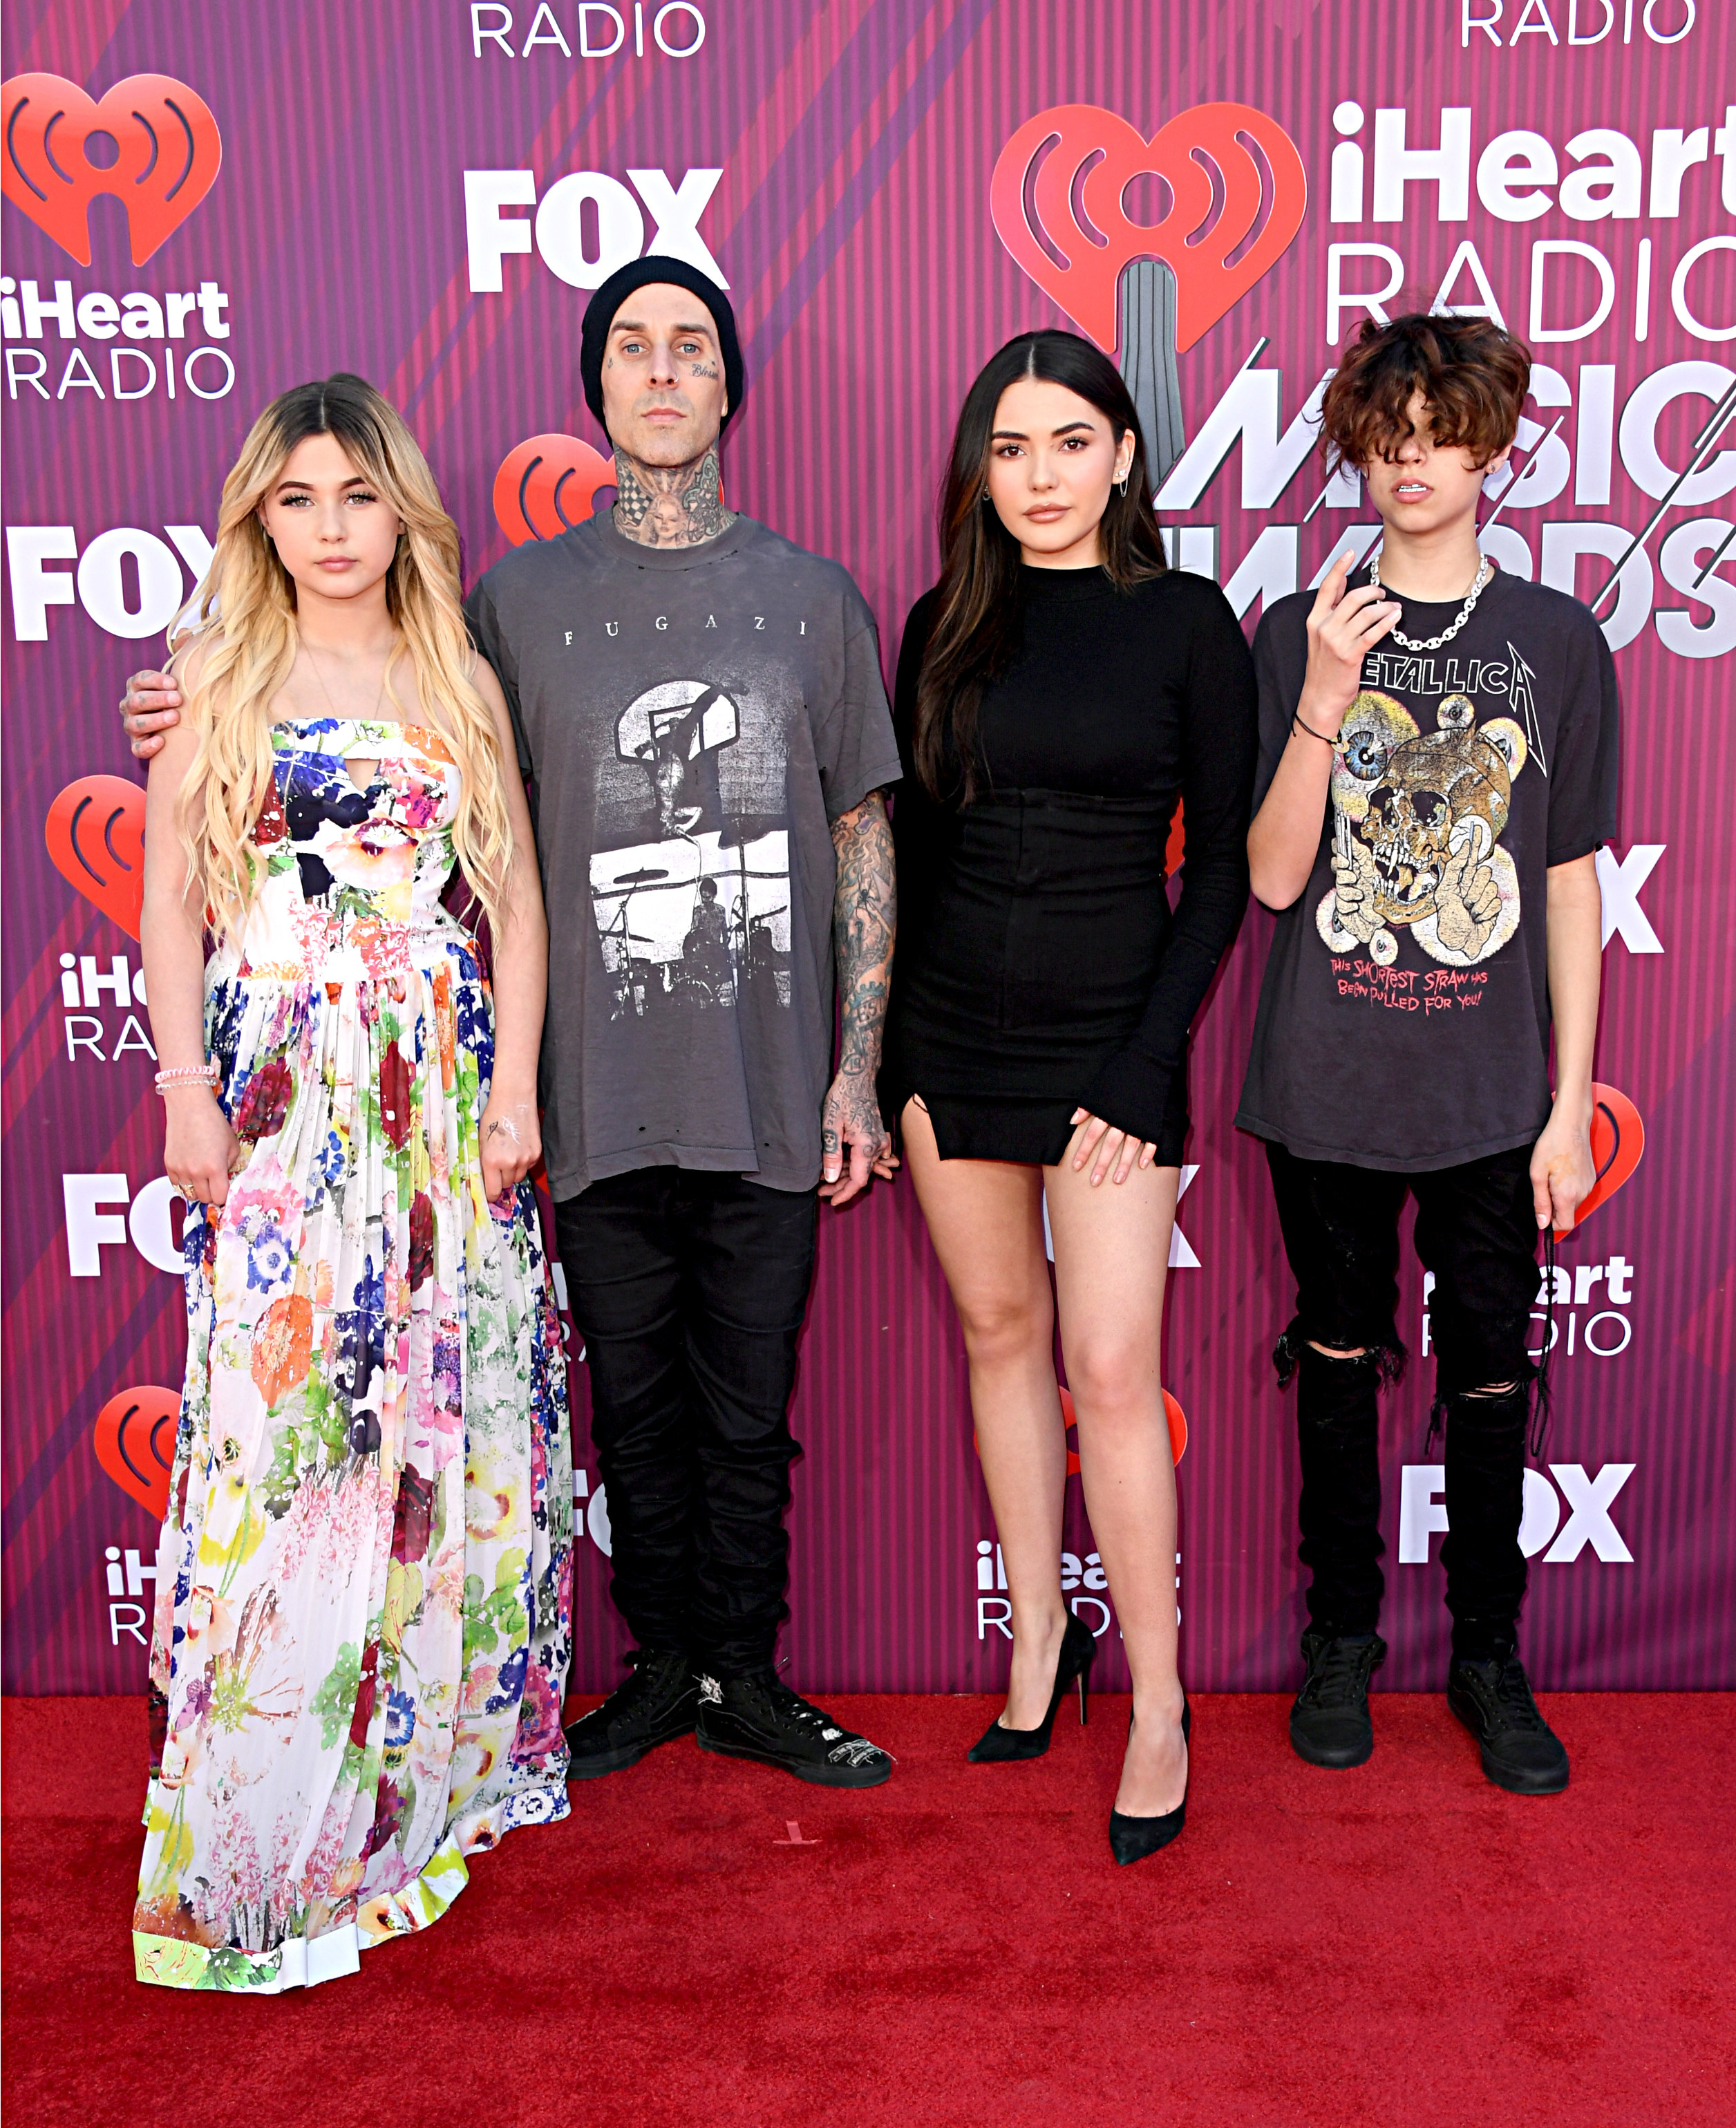 Travis poses with his kids on the red carpet at the I Heart Radio Awards